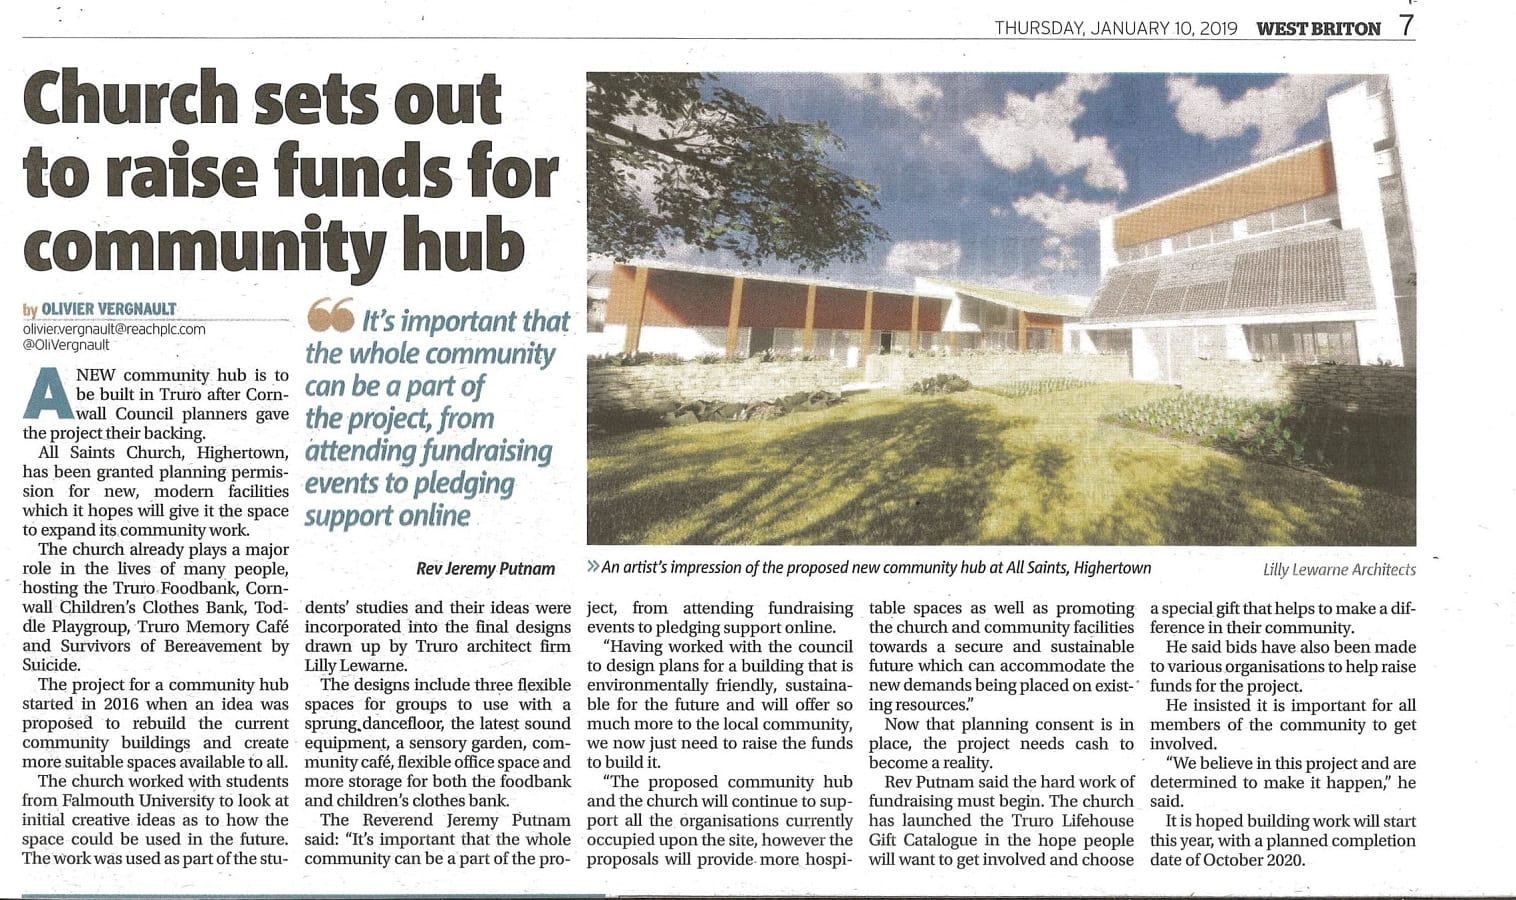 Newpaper article about new design for cummunity hub with Highertown Church